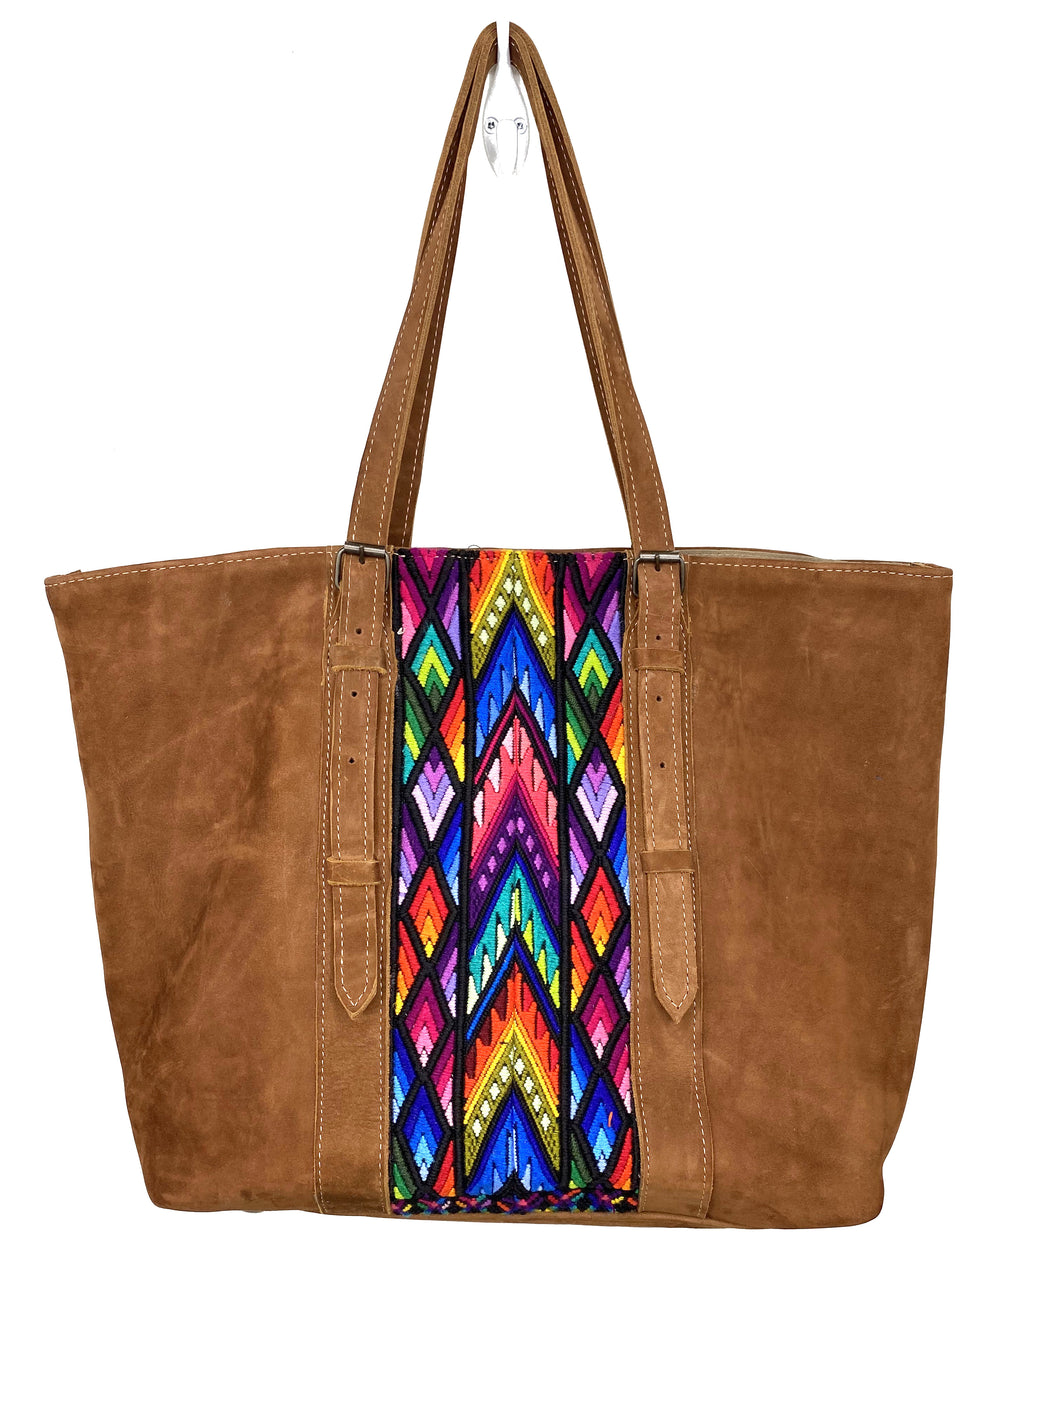 MoonLake Designs handmade unique Isabella Large Everyday Tote in Suede with Sunset Huipil Design including blues pinks reds and purples